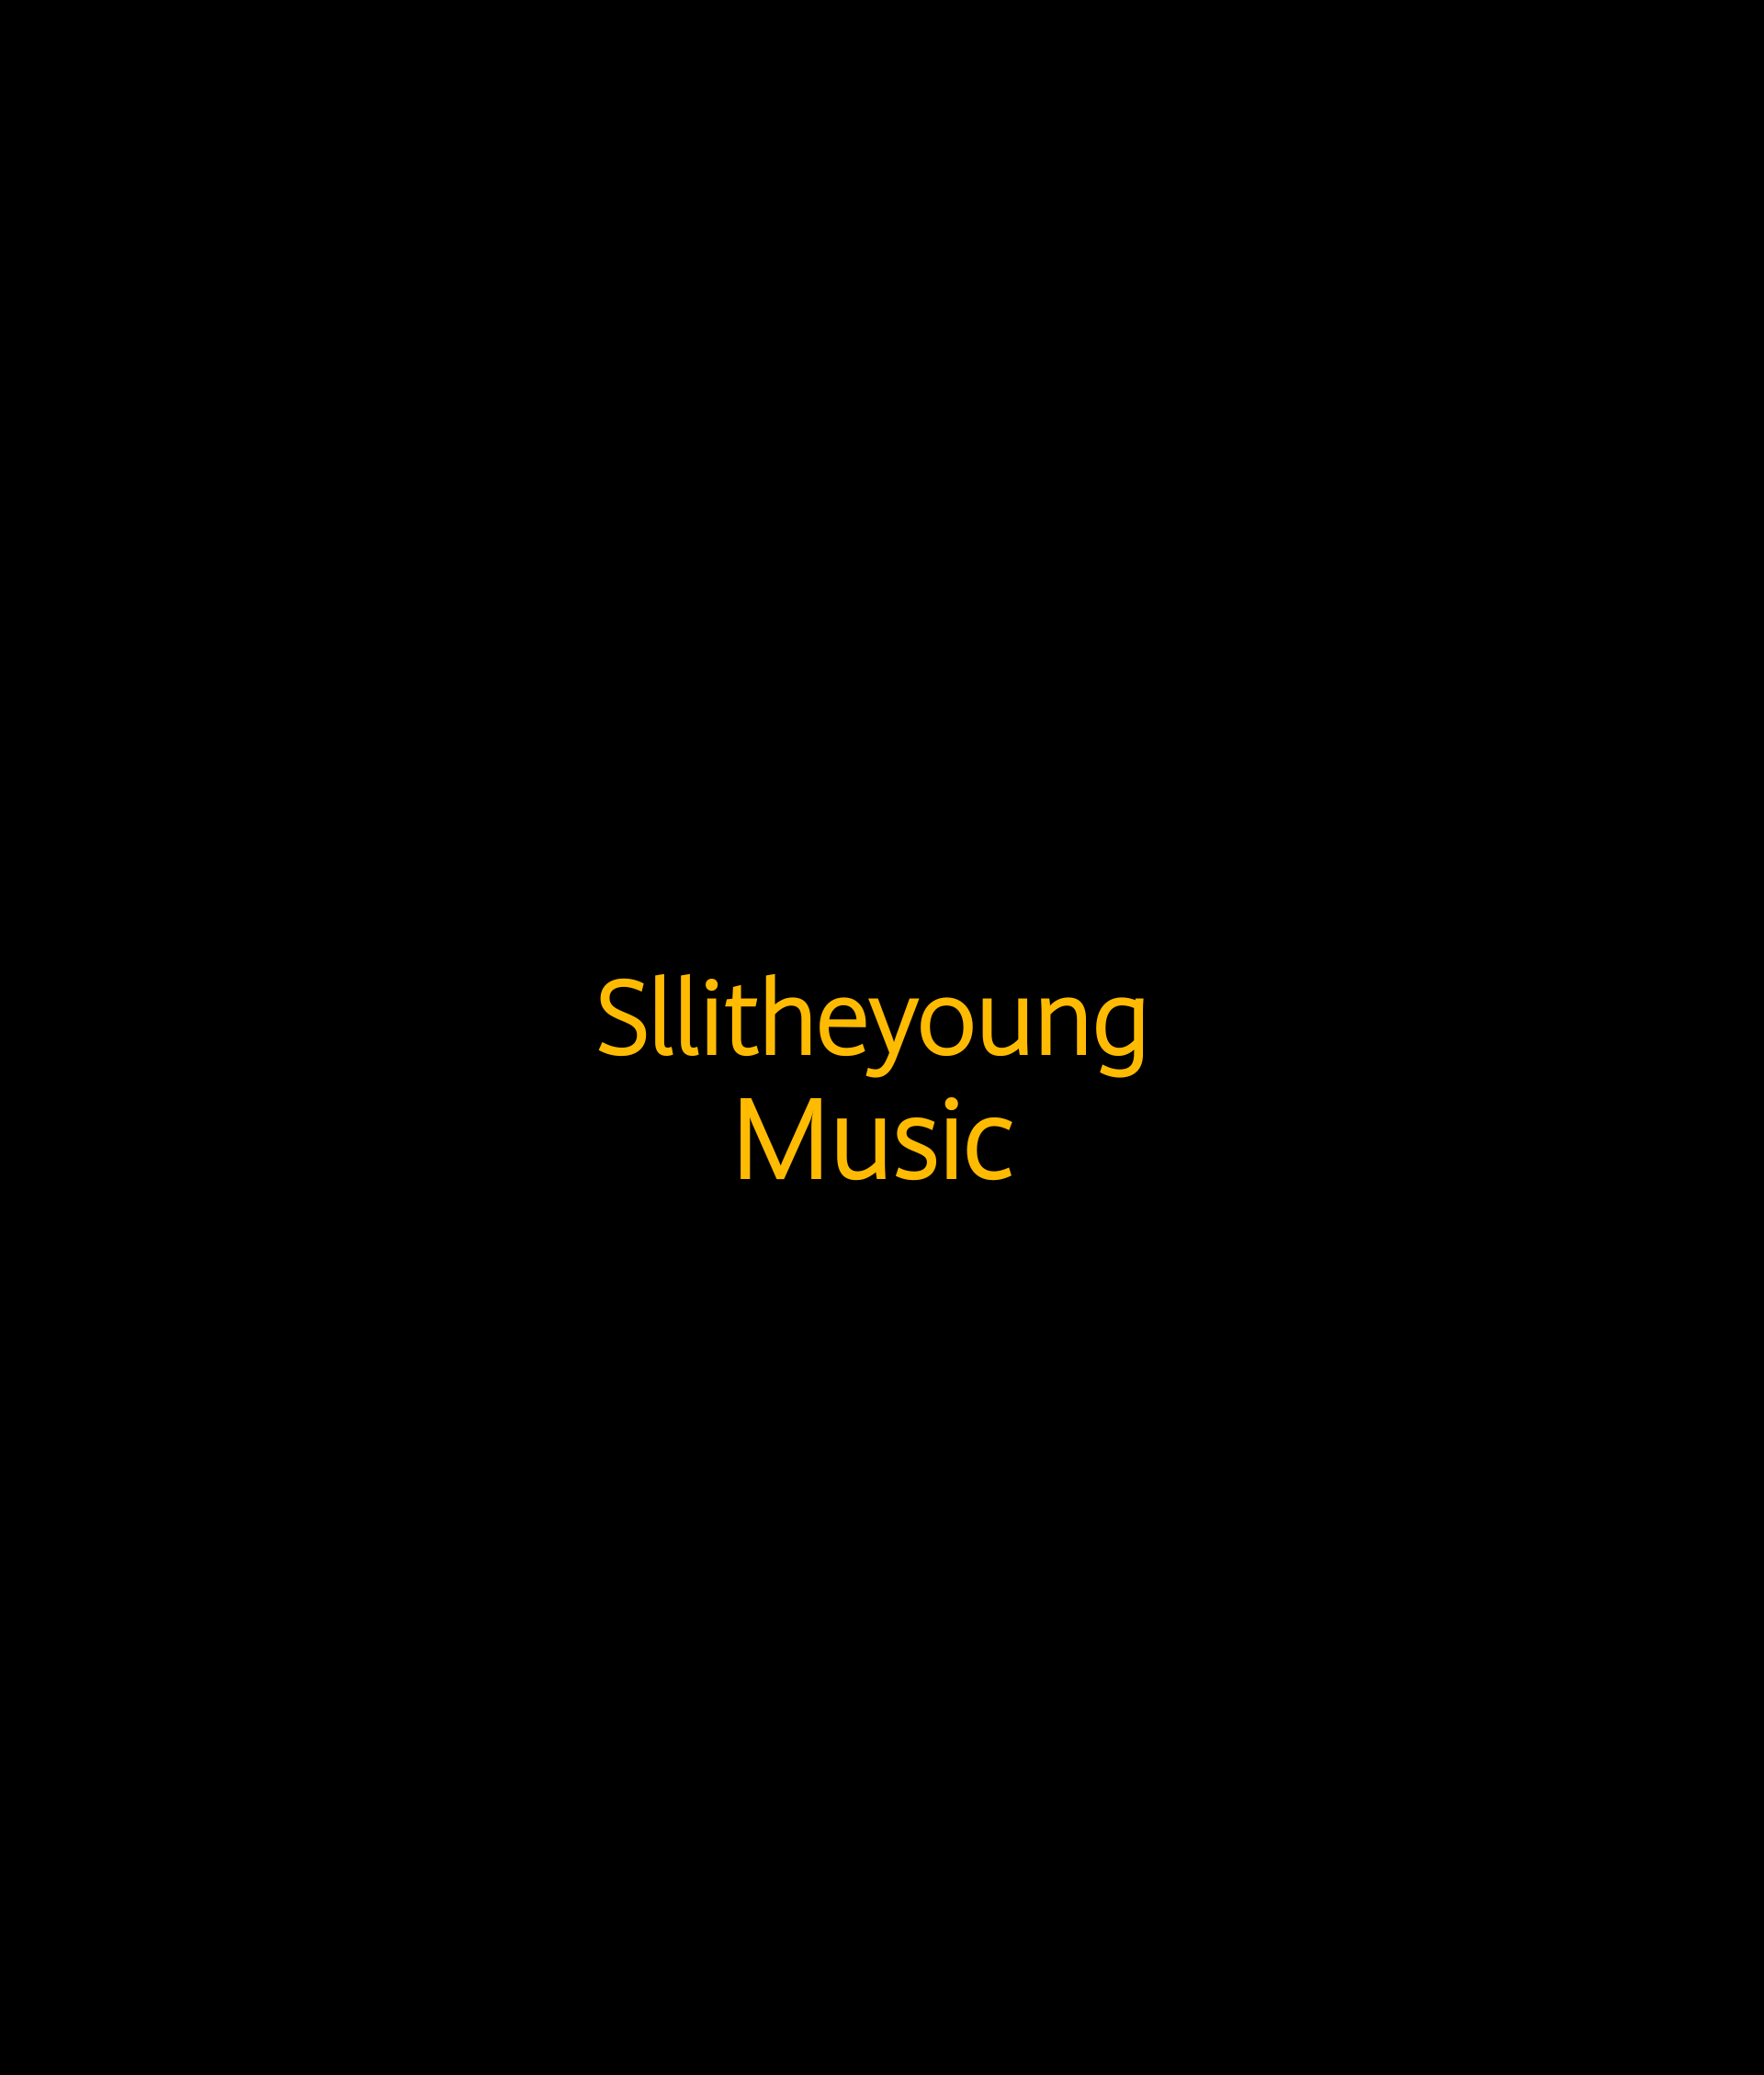 Road block - Sllitheyoung